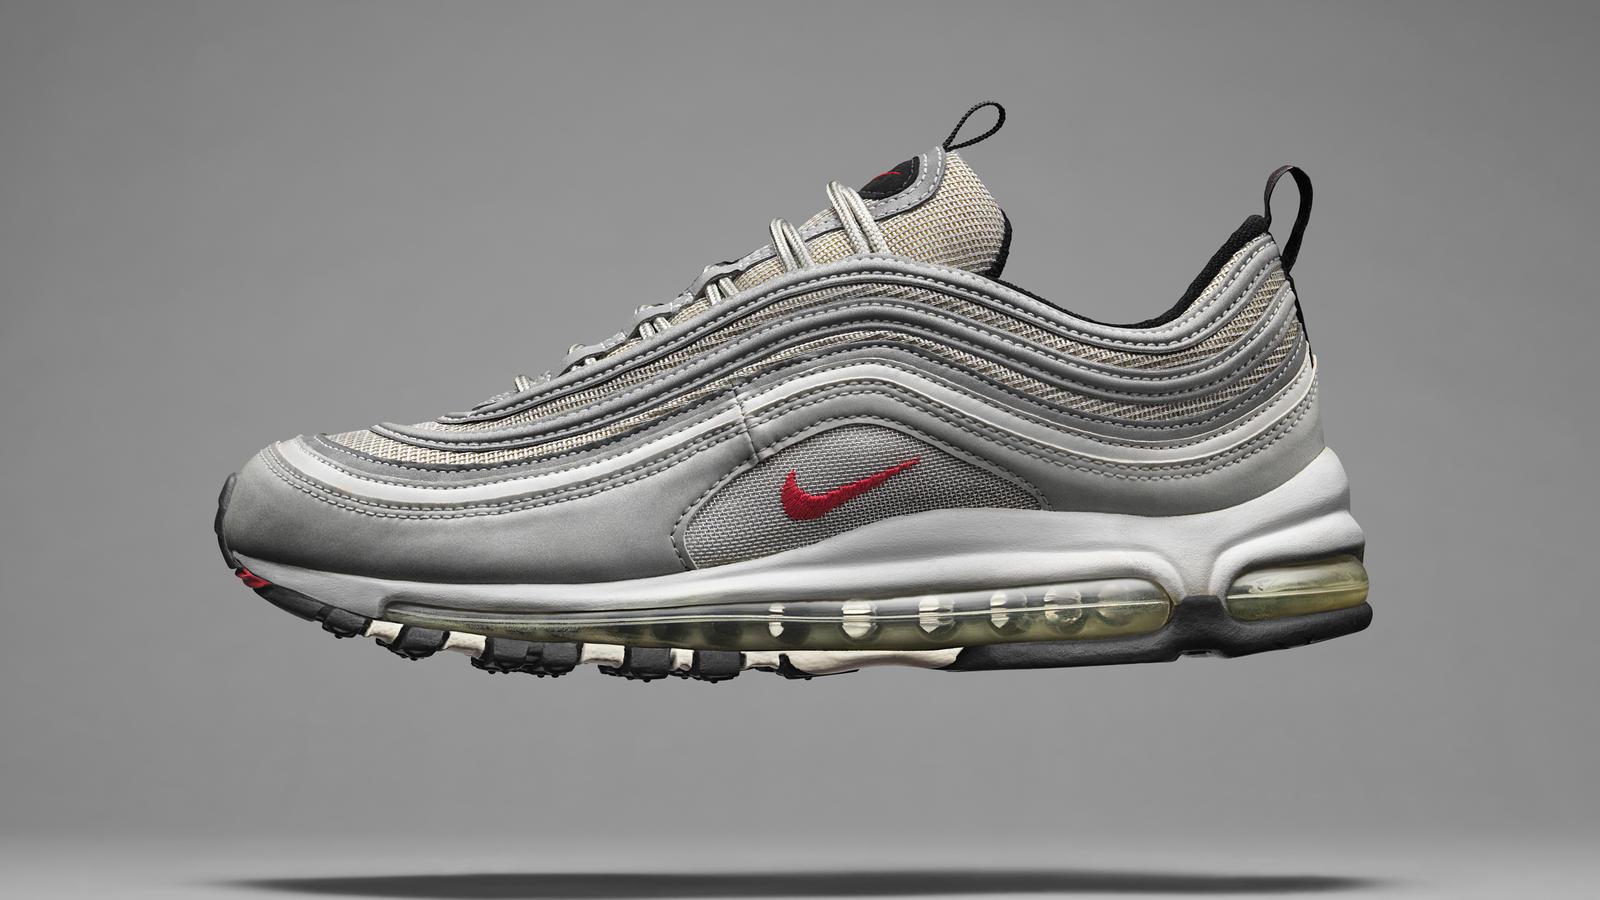 Nike Air Max 97 Size Chart : Is the Air Max 97 true to size